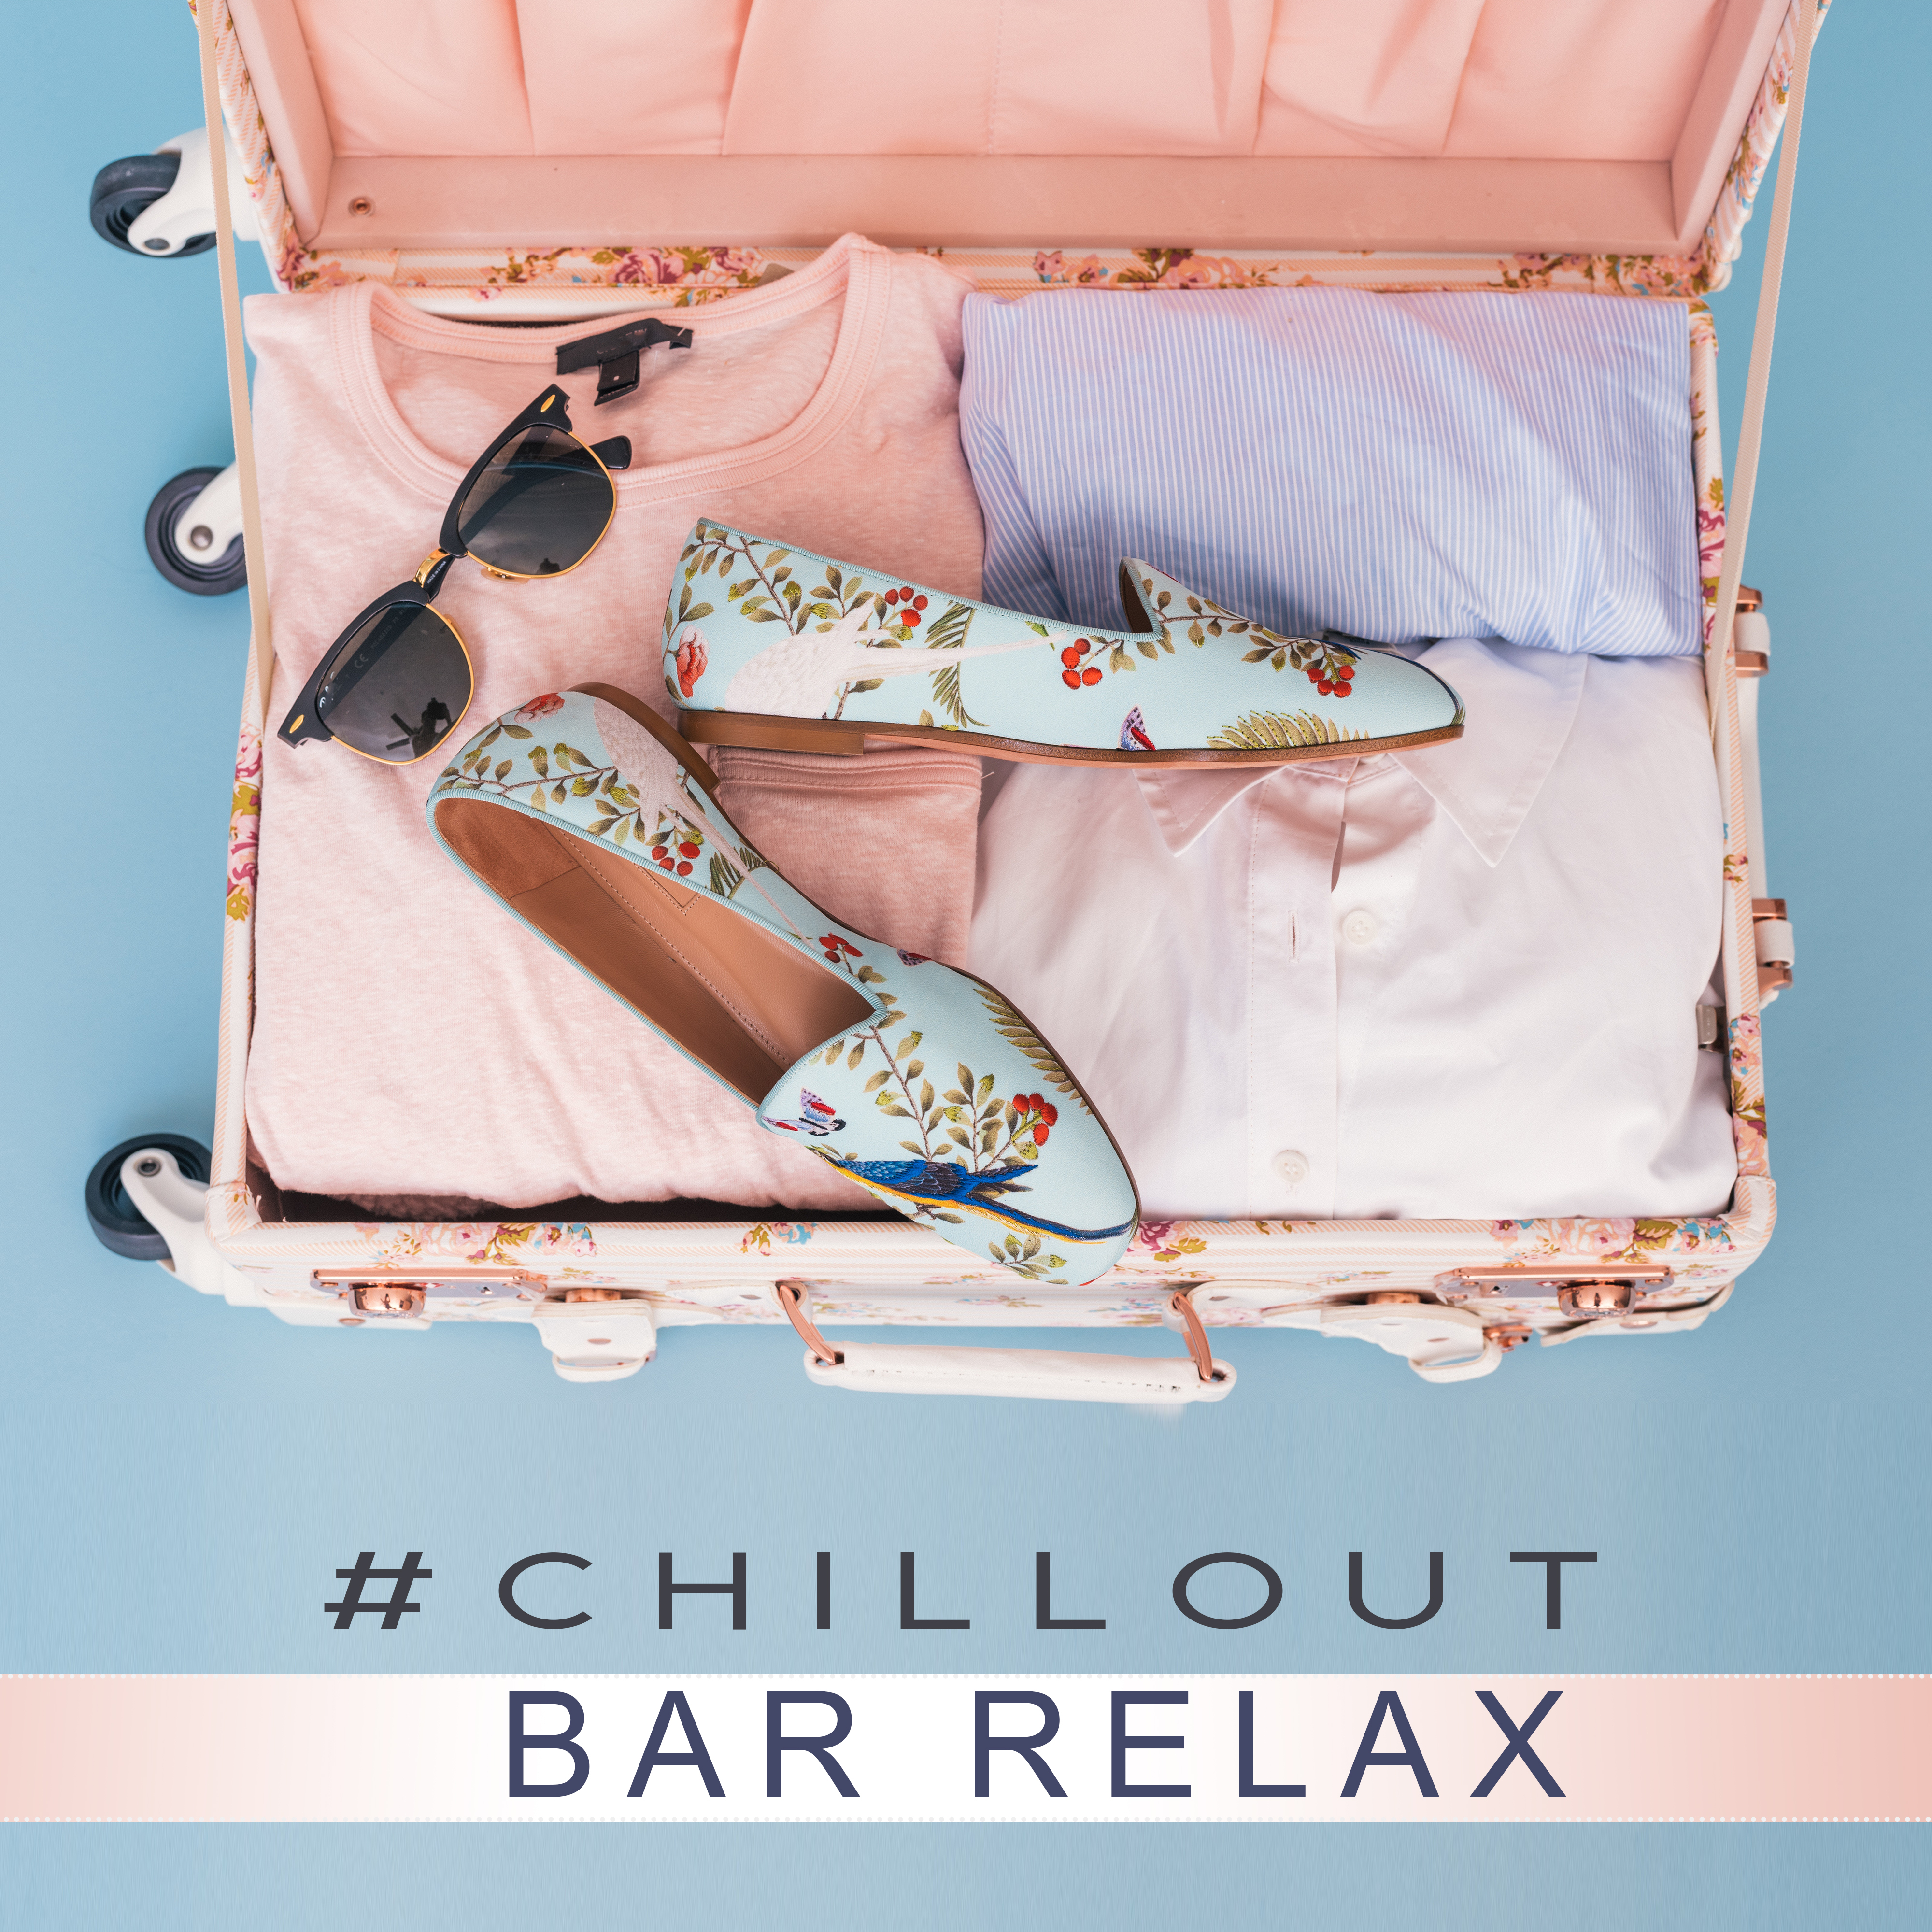 #Chillout Bar Relax